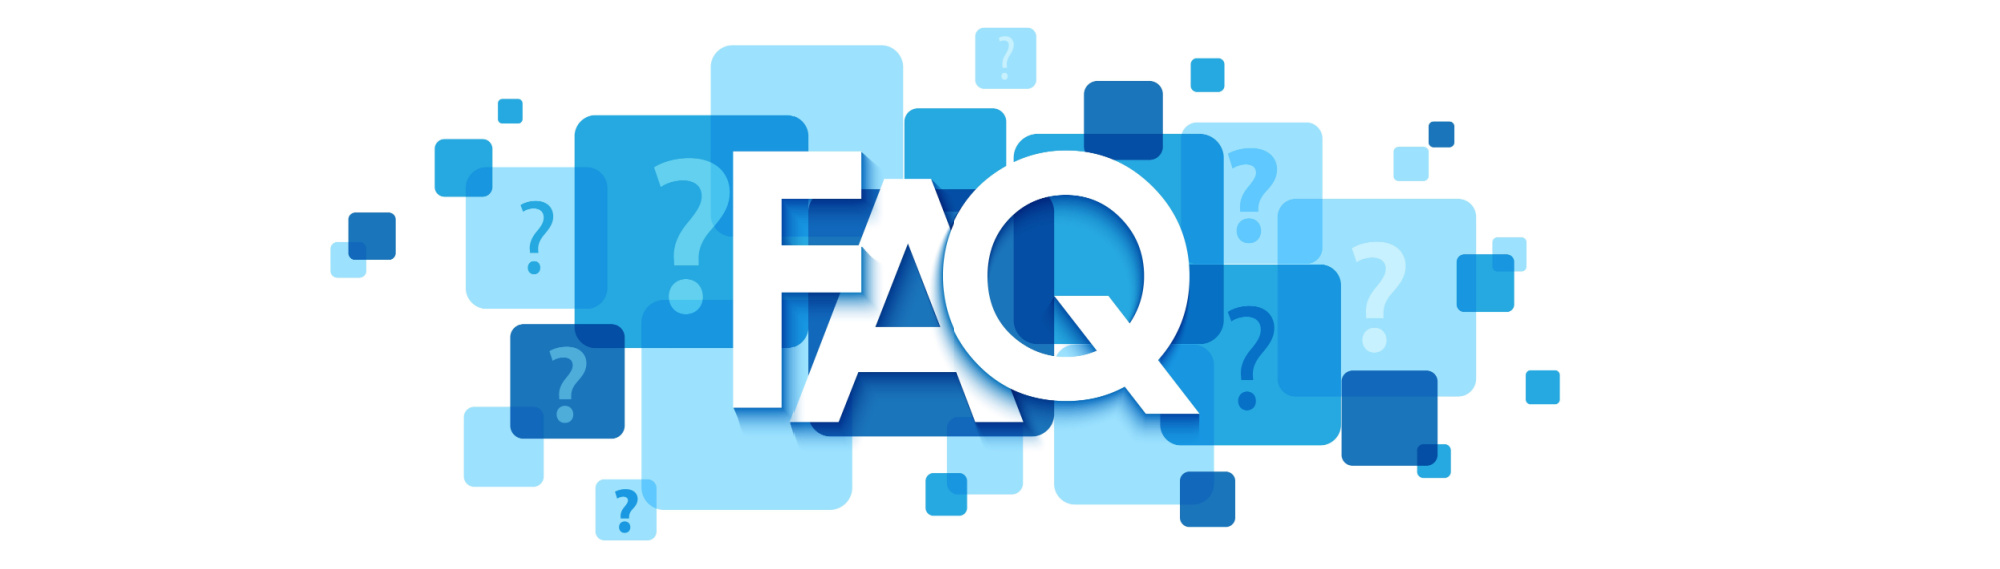 image of frequently asked questions